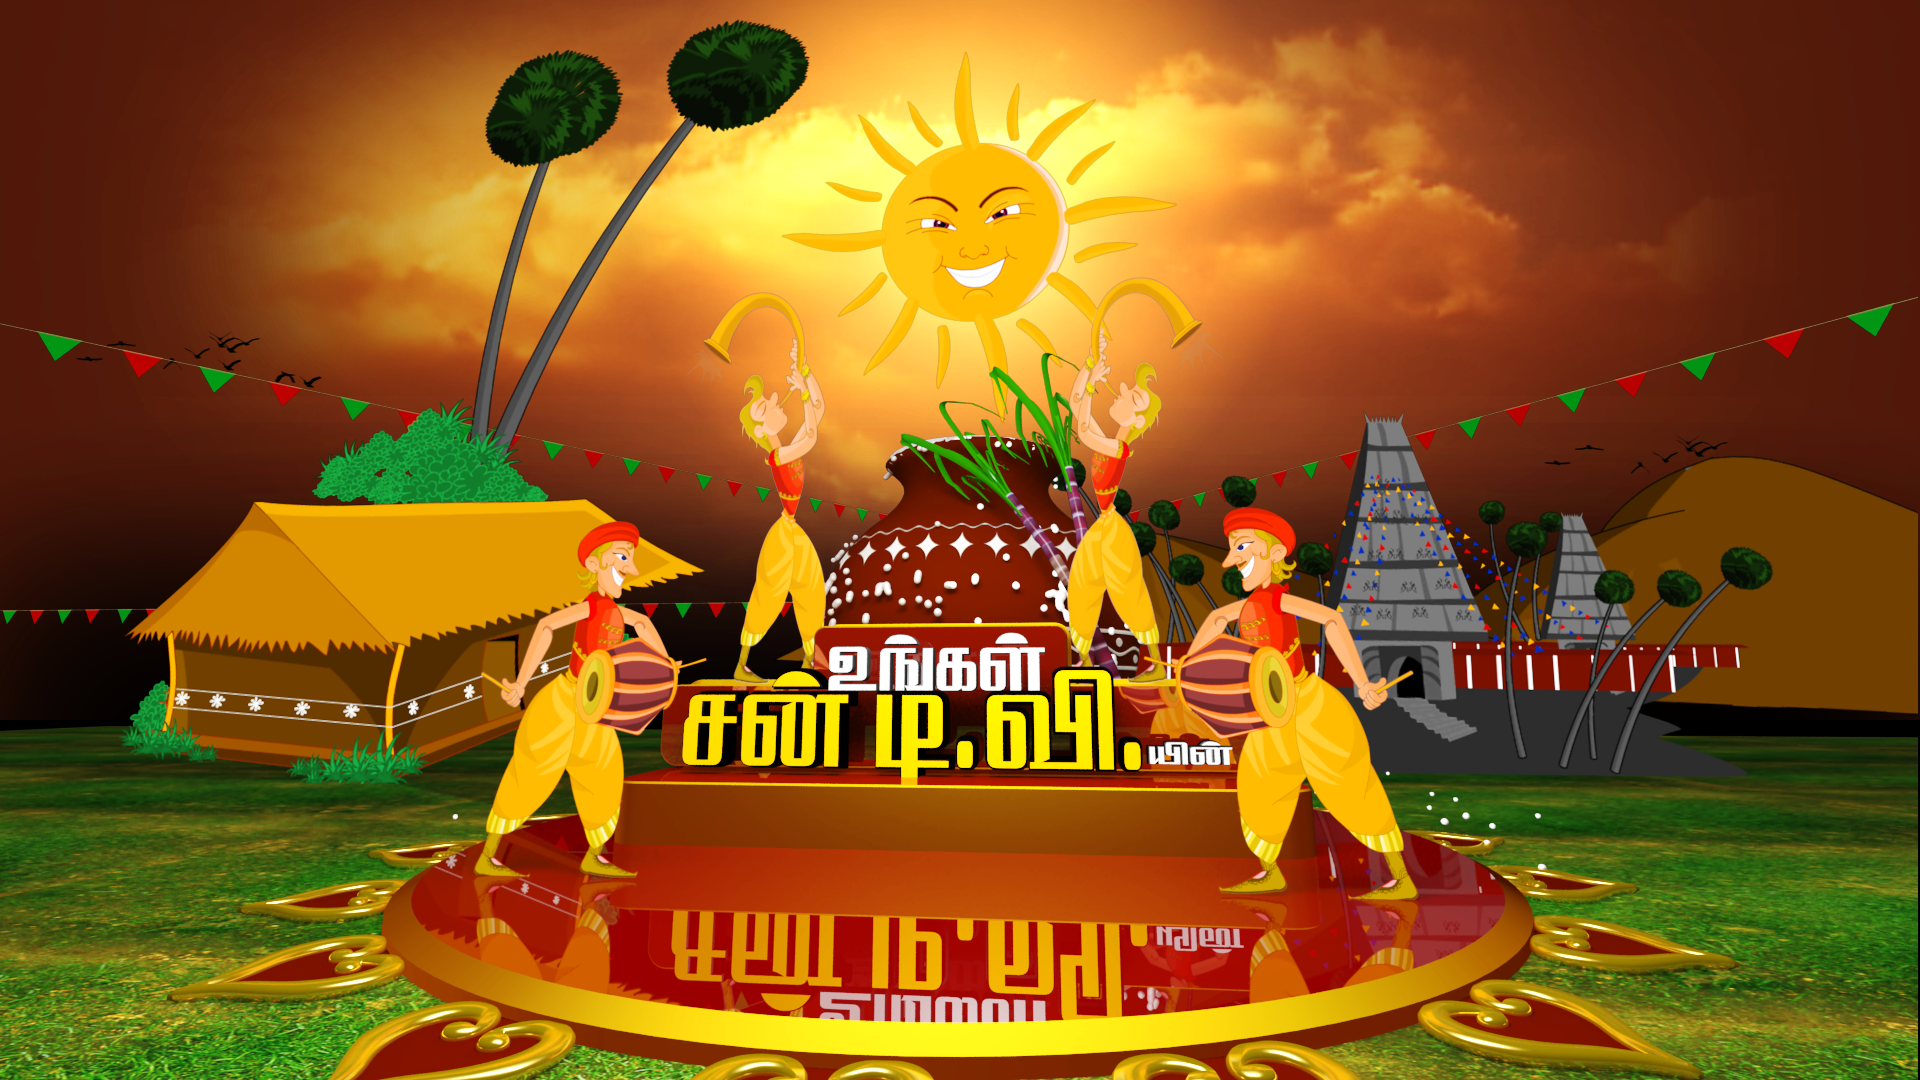 High Quality Happy Pongal Wallpapers Free Download - Stage - 1920x1080  Wallpaper 